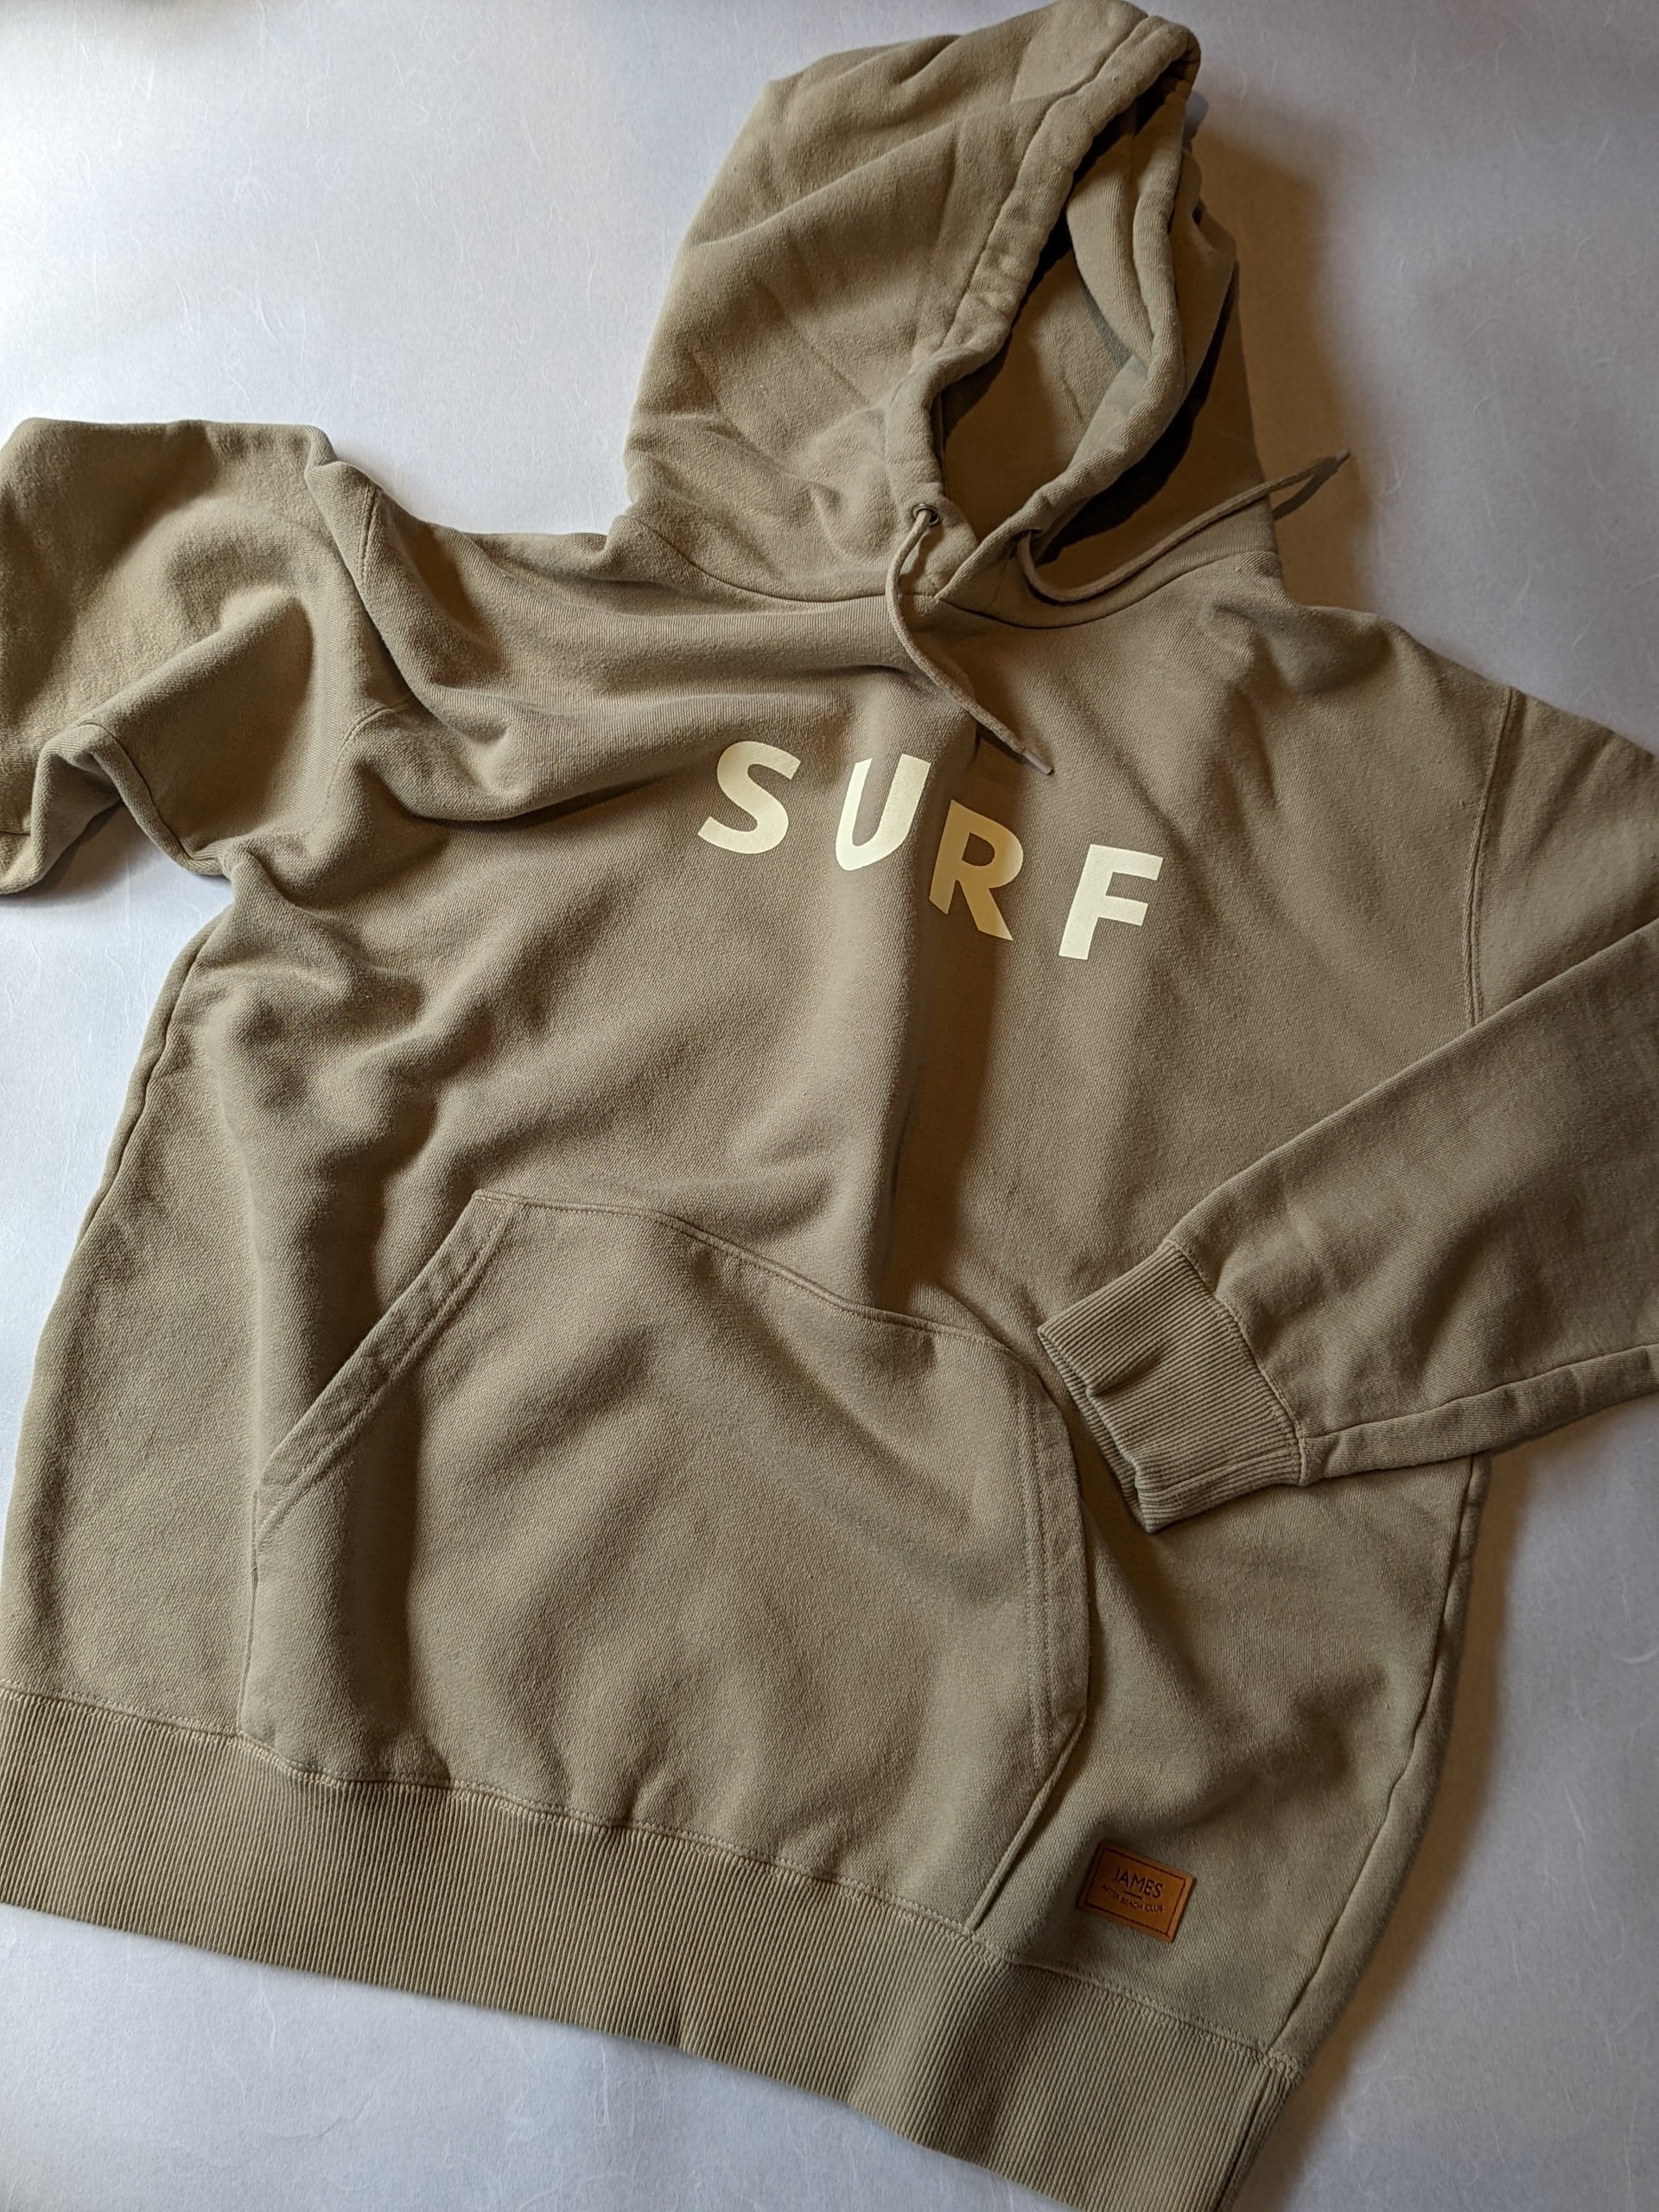 【JAMES AFTER BEACH CLUB】SURF Hoodie（パーカー）　|　JAMES&CO.